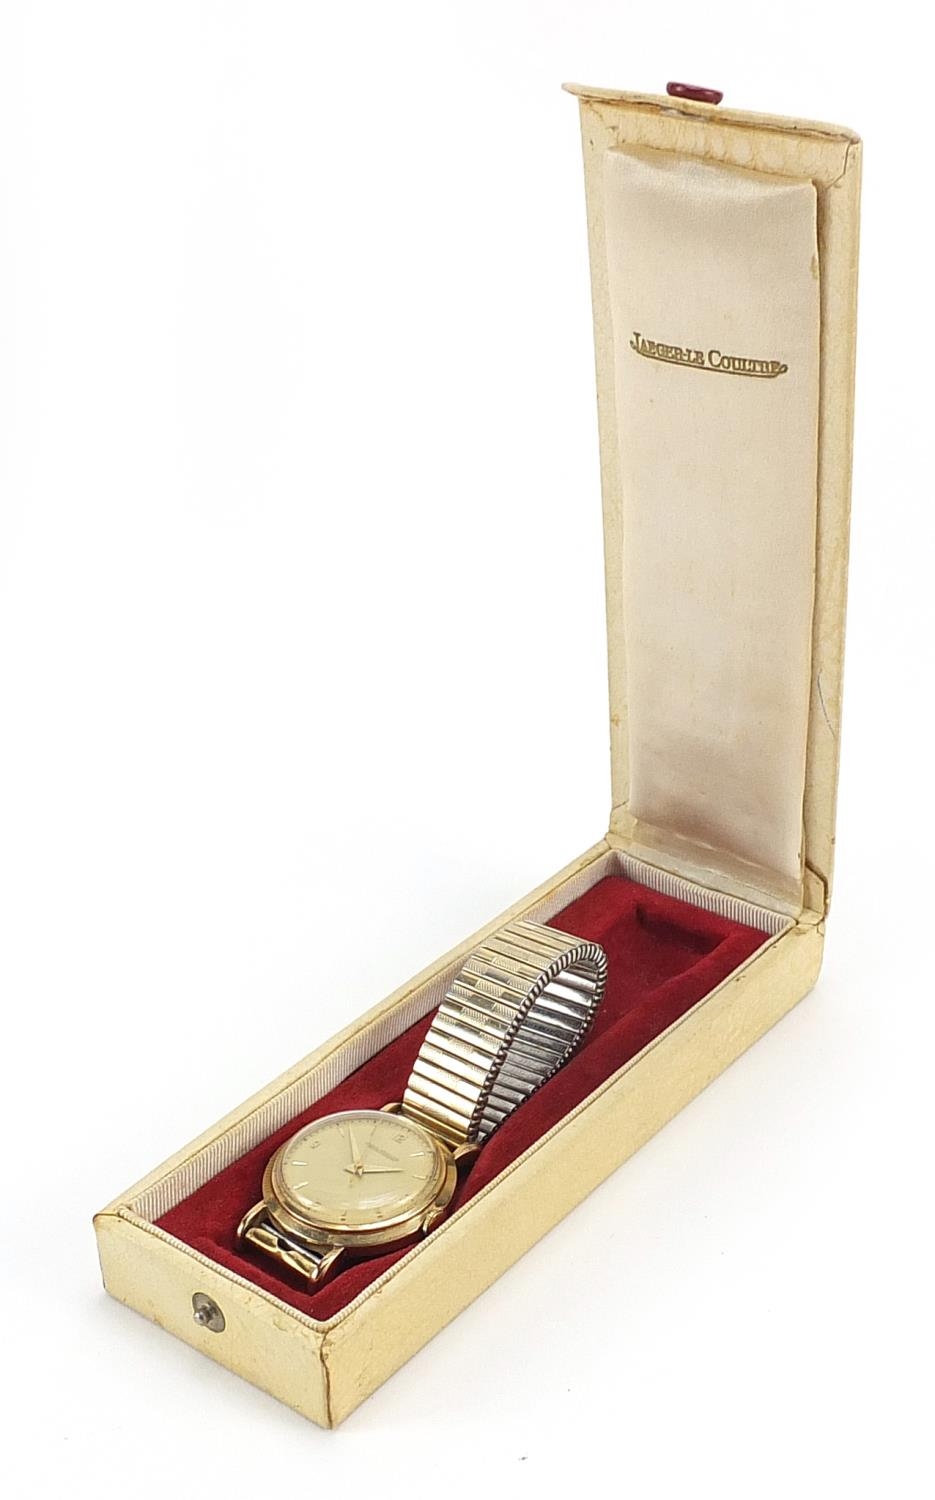 Jaeger LeCoultre, vintage gentlemen's 9ct gold wristwatch with Barclay's Bank inscription box, the - Image 5 of 6